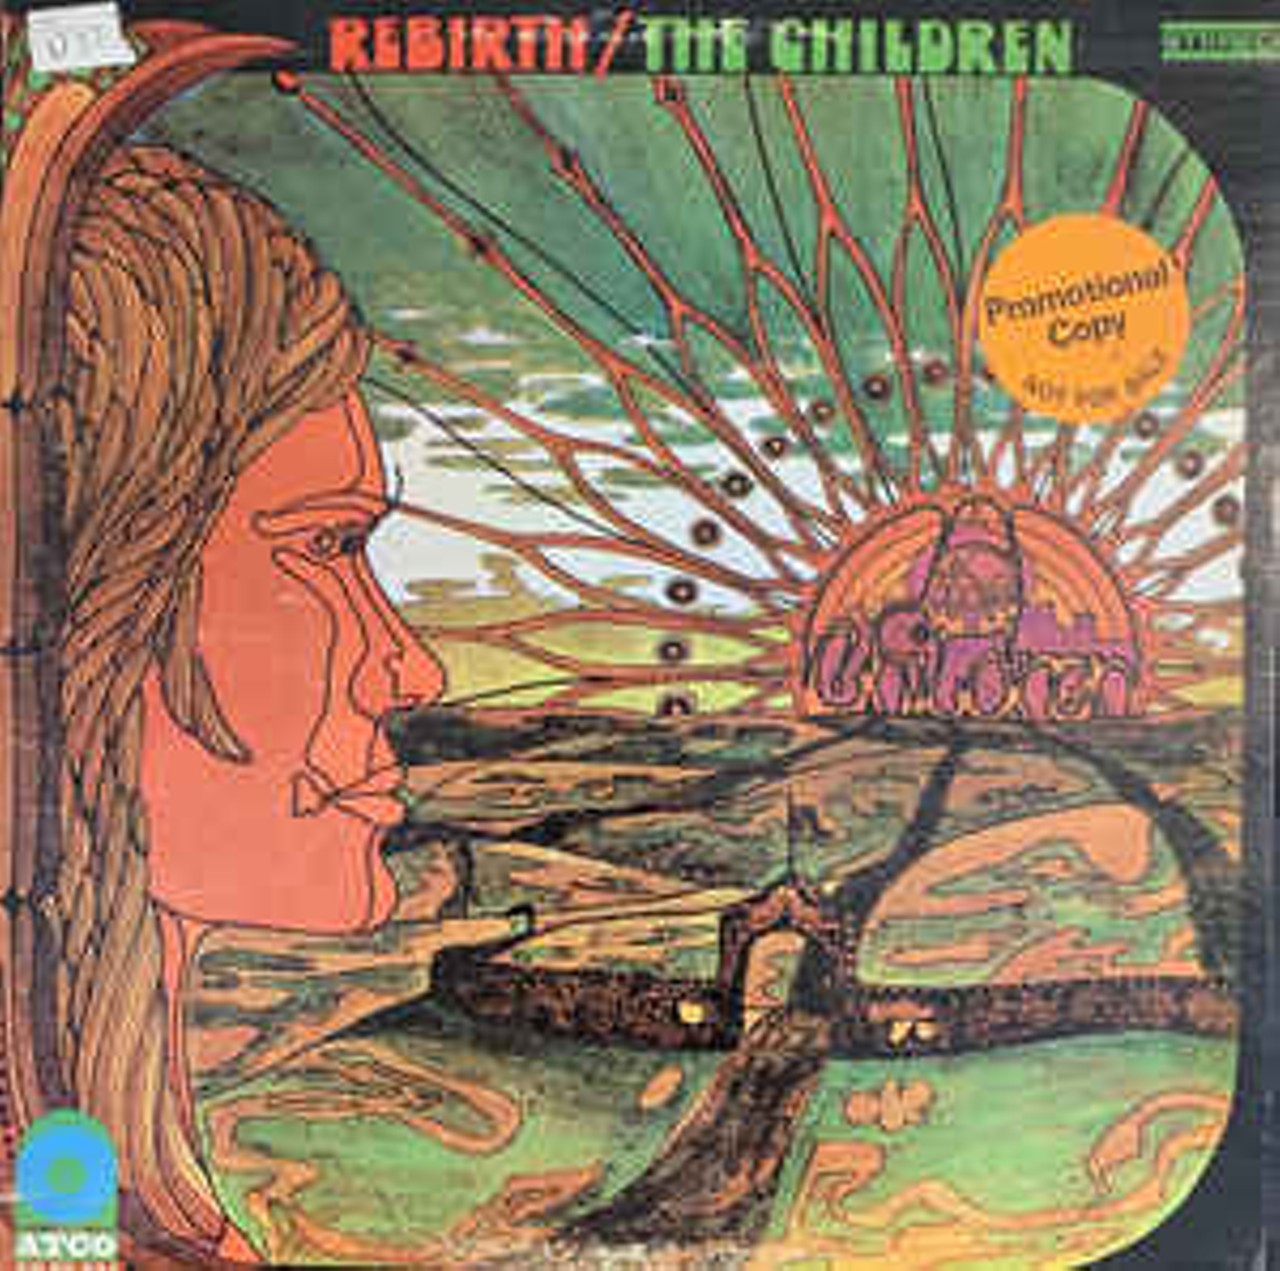 The Children: "Rebirth"
The sole album by 1960s San Antonio psych band The Children was recorded after it made an unsuccessful attempt to relocate to California. "Rebirth" is a varied affair that vacillates between dark moodiness and occasional jumps into genres including country and jazz. It's a wild ride, much like the tail end of the decade in which it was recorded.
Photo via ATCO Records